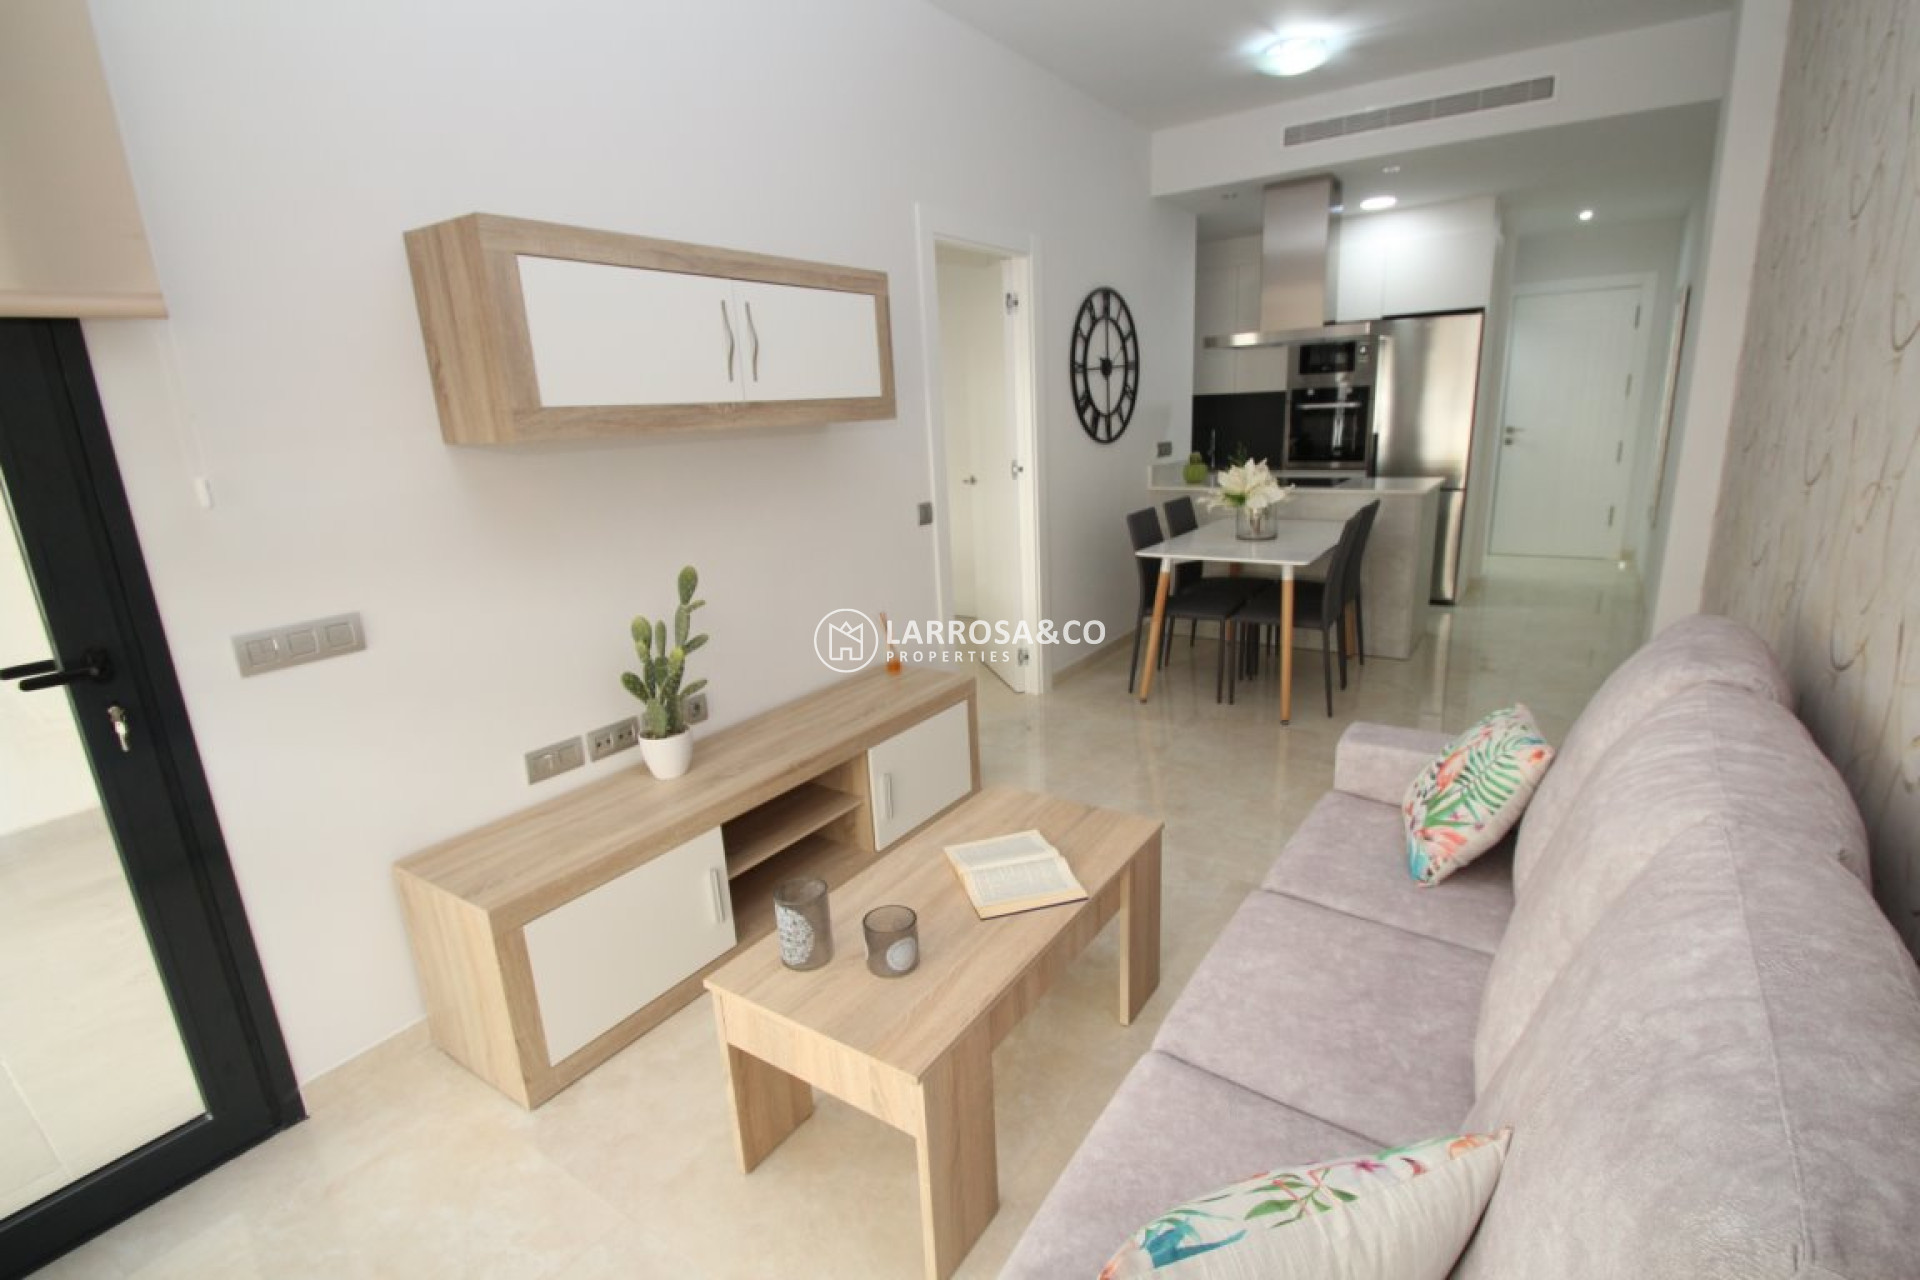 new-build-apartment-torrevieja-living-room-on2083